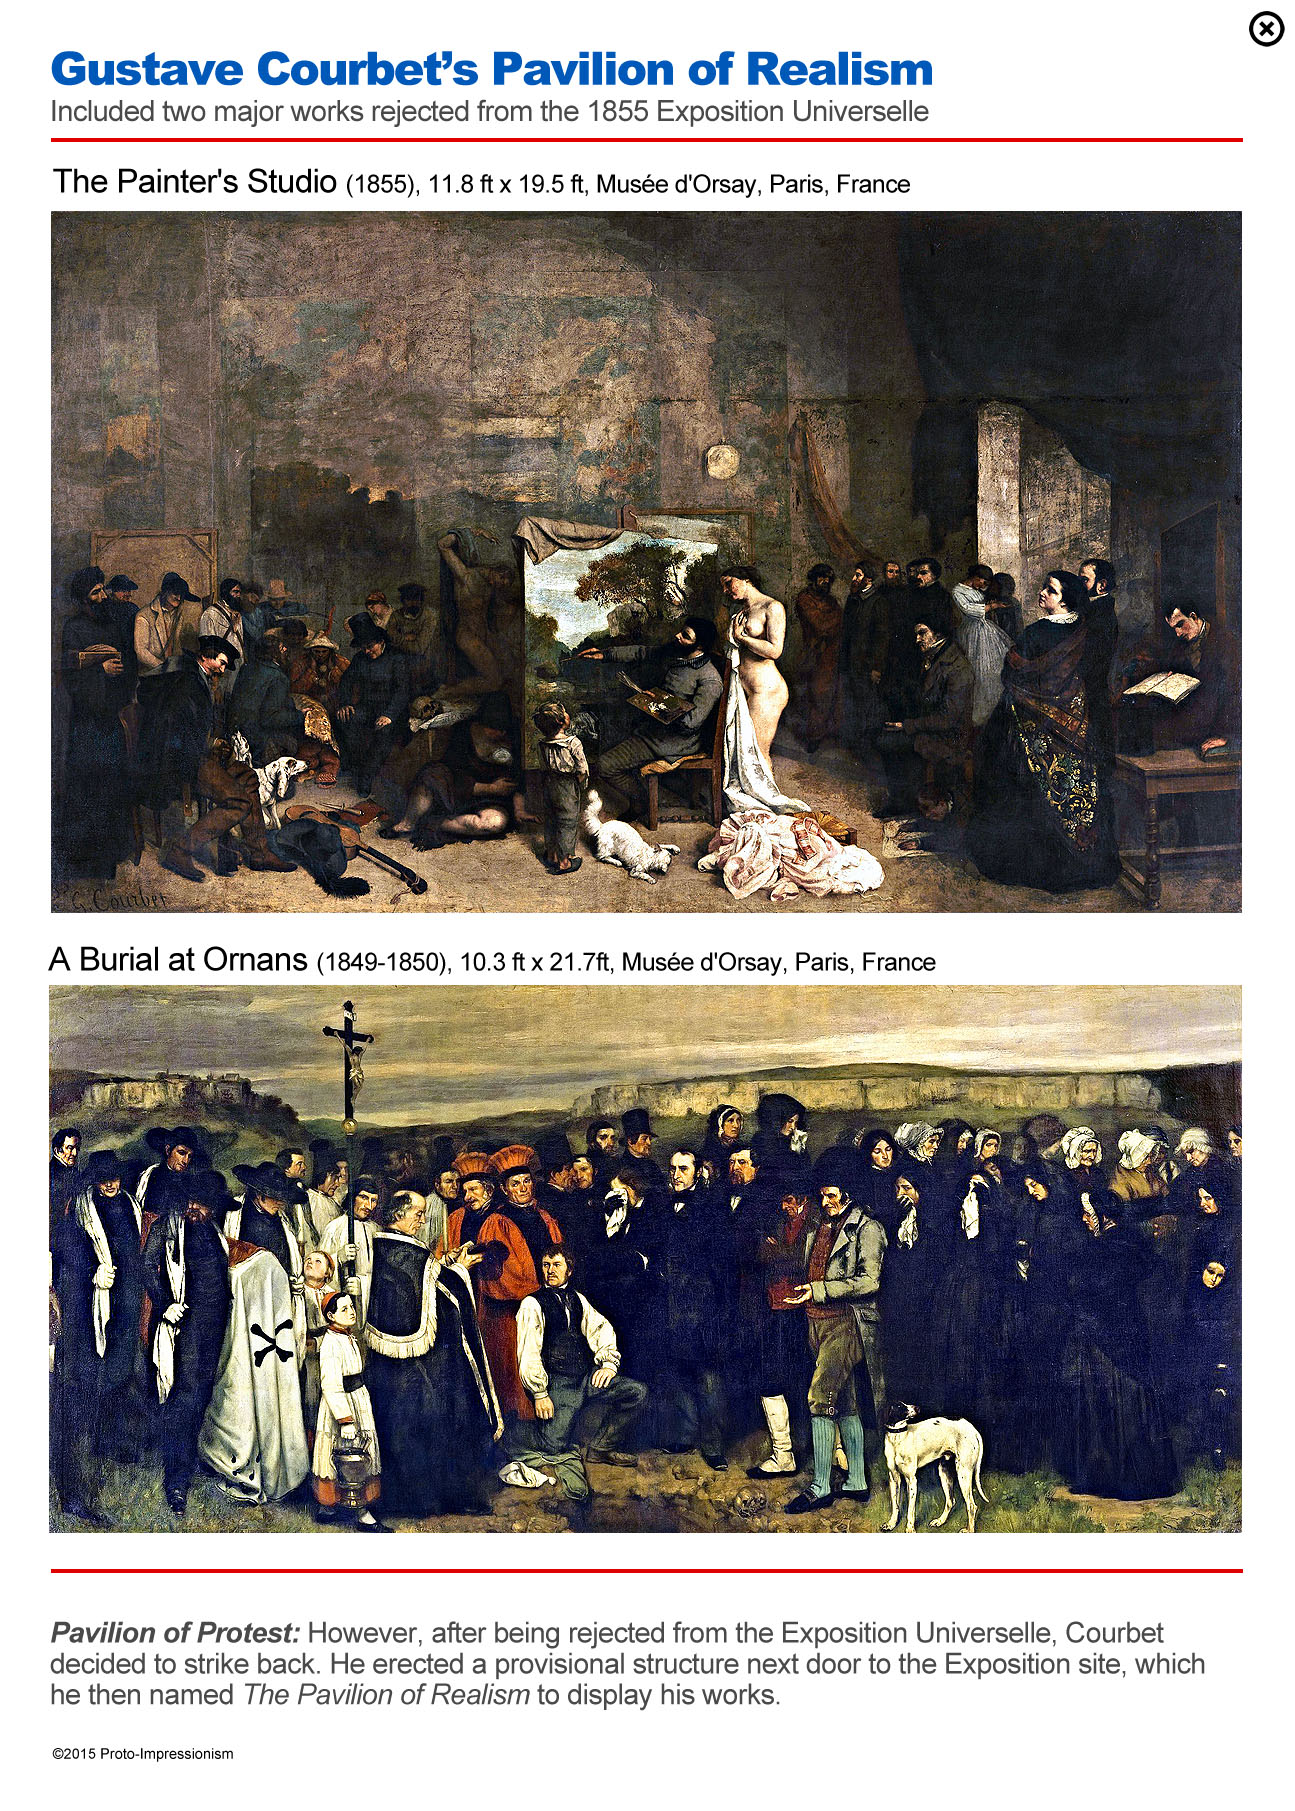 Gustave Courbet's Pavilion of Realism